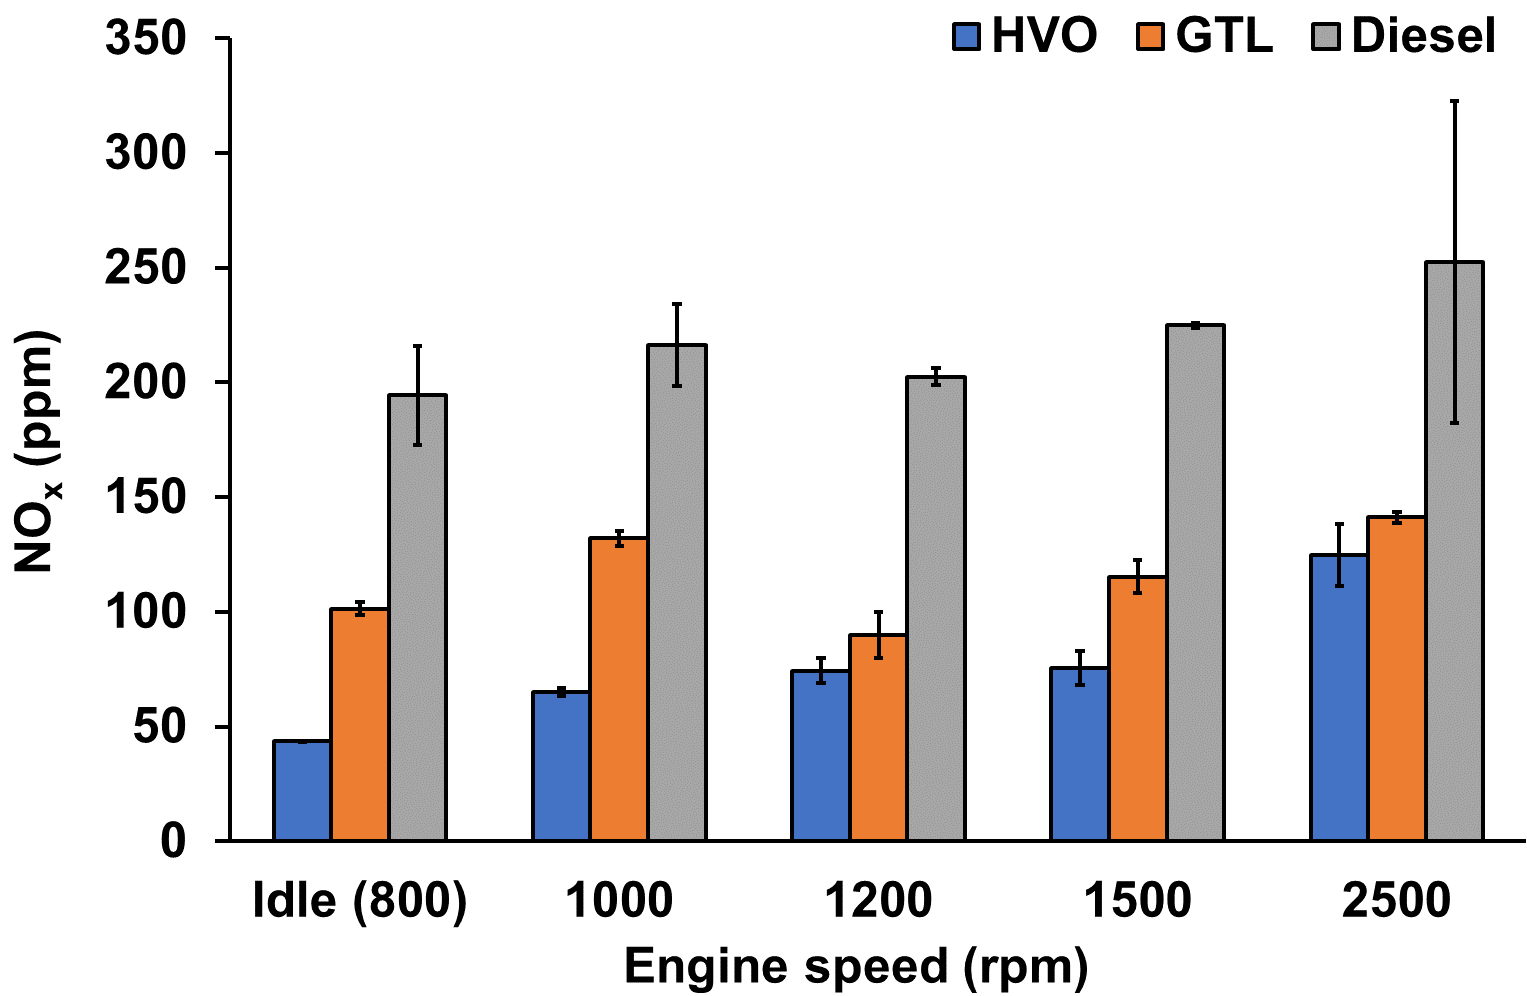 Figure 5 Exhaust gas concentrations of NOx (ppm) from the starboard engine at 5 speed conditions operated on Diesel, GTL, and HVO.